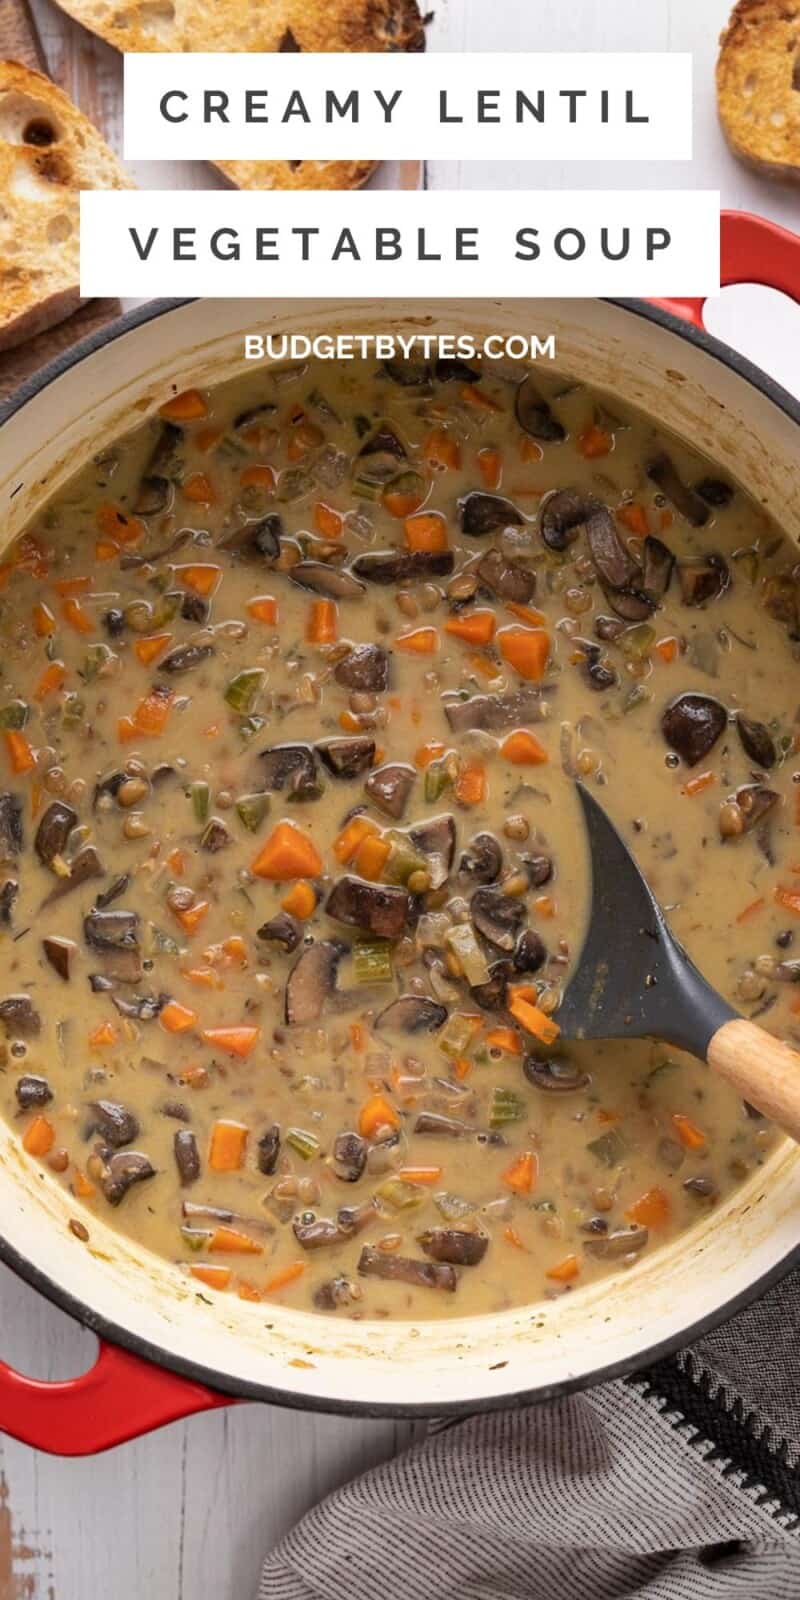 Overhead view of a pot full of creamy lentil vegetable soup.